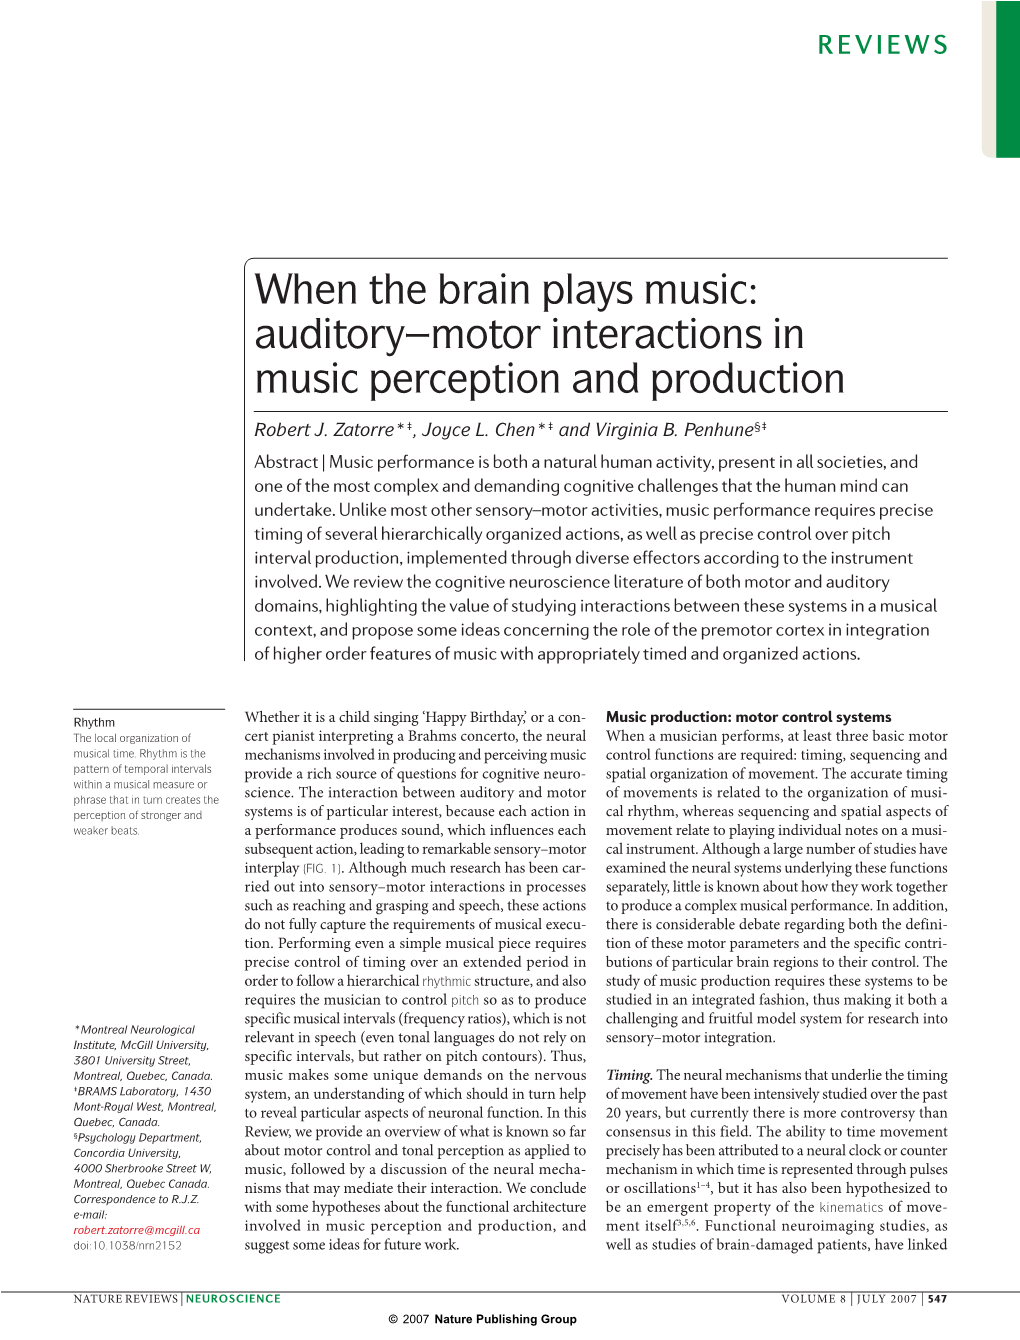 When the Brain Plays Music: Auditory–Motor Interactions in Music Perception and Production